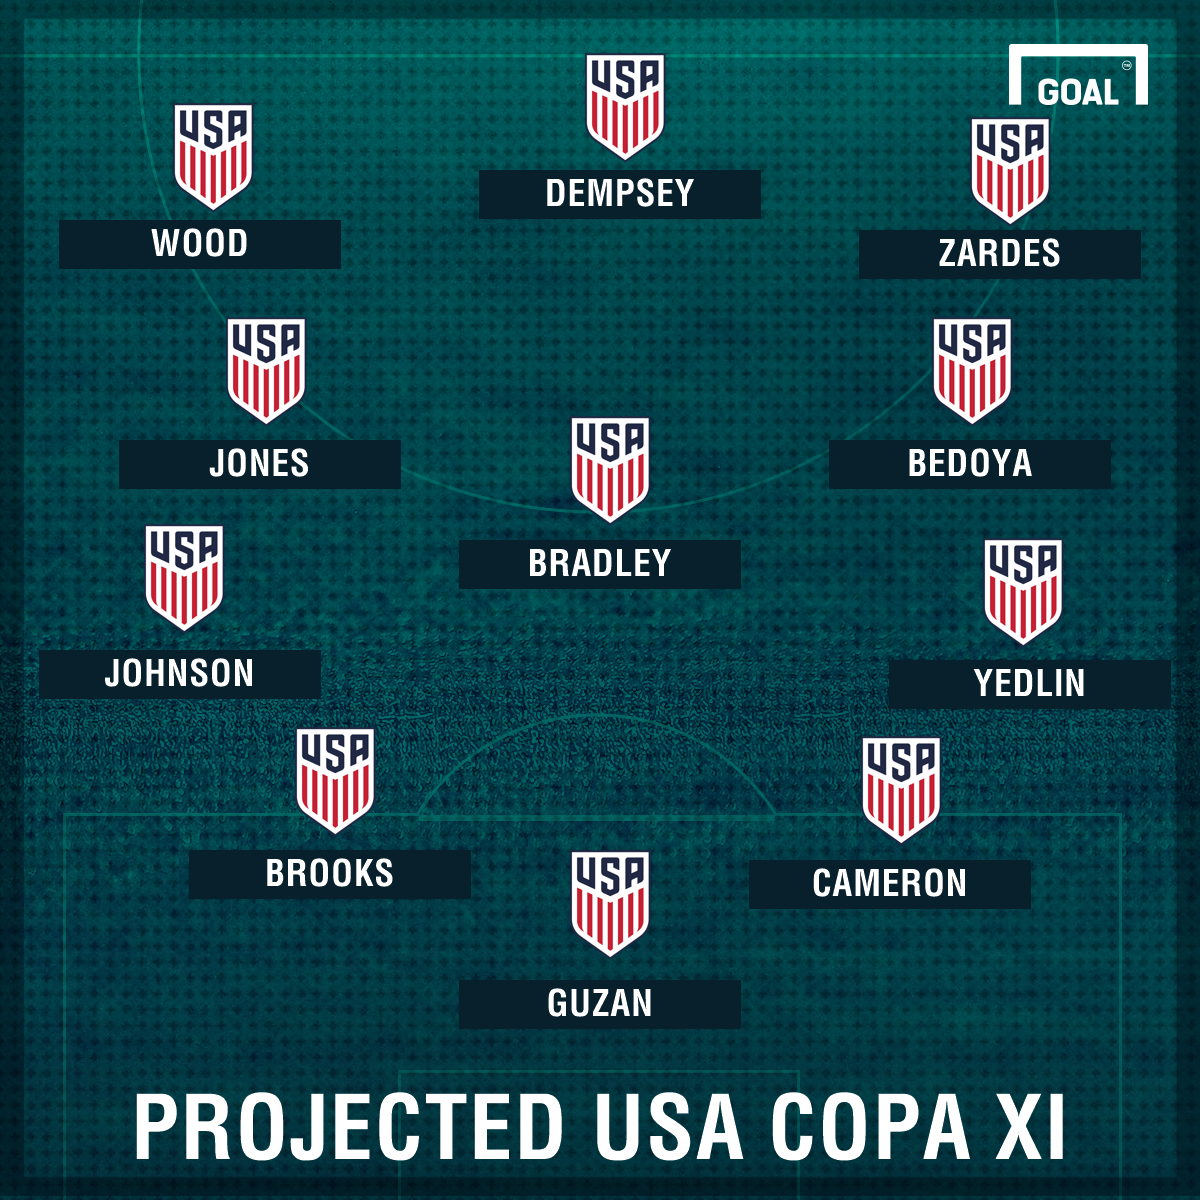 usa-projected-copa-america-xi_18ux2cnvpxa0i136f8zvr1ub3s.png